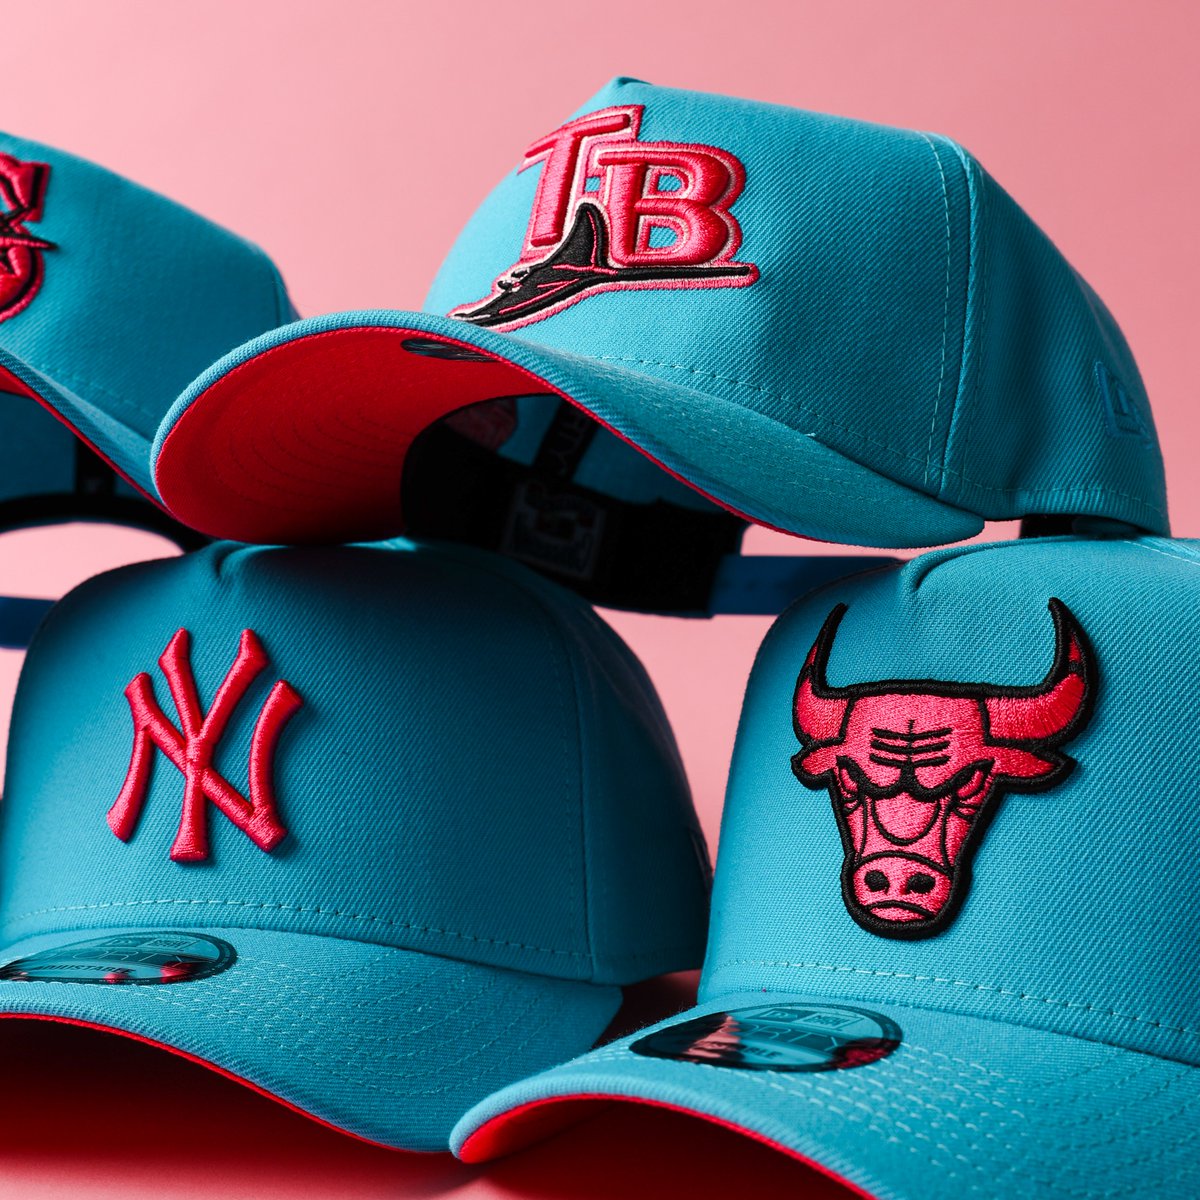 New Era don't miss! Just like the Eastern Conference Champions 🔥 Ft. The 'Neon Vice' range. 👀🔌